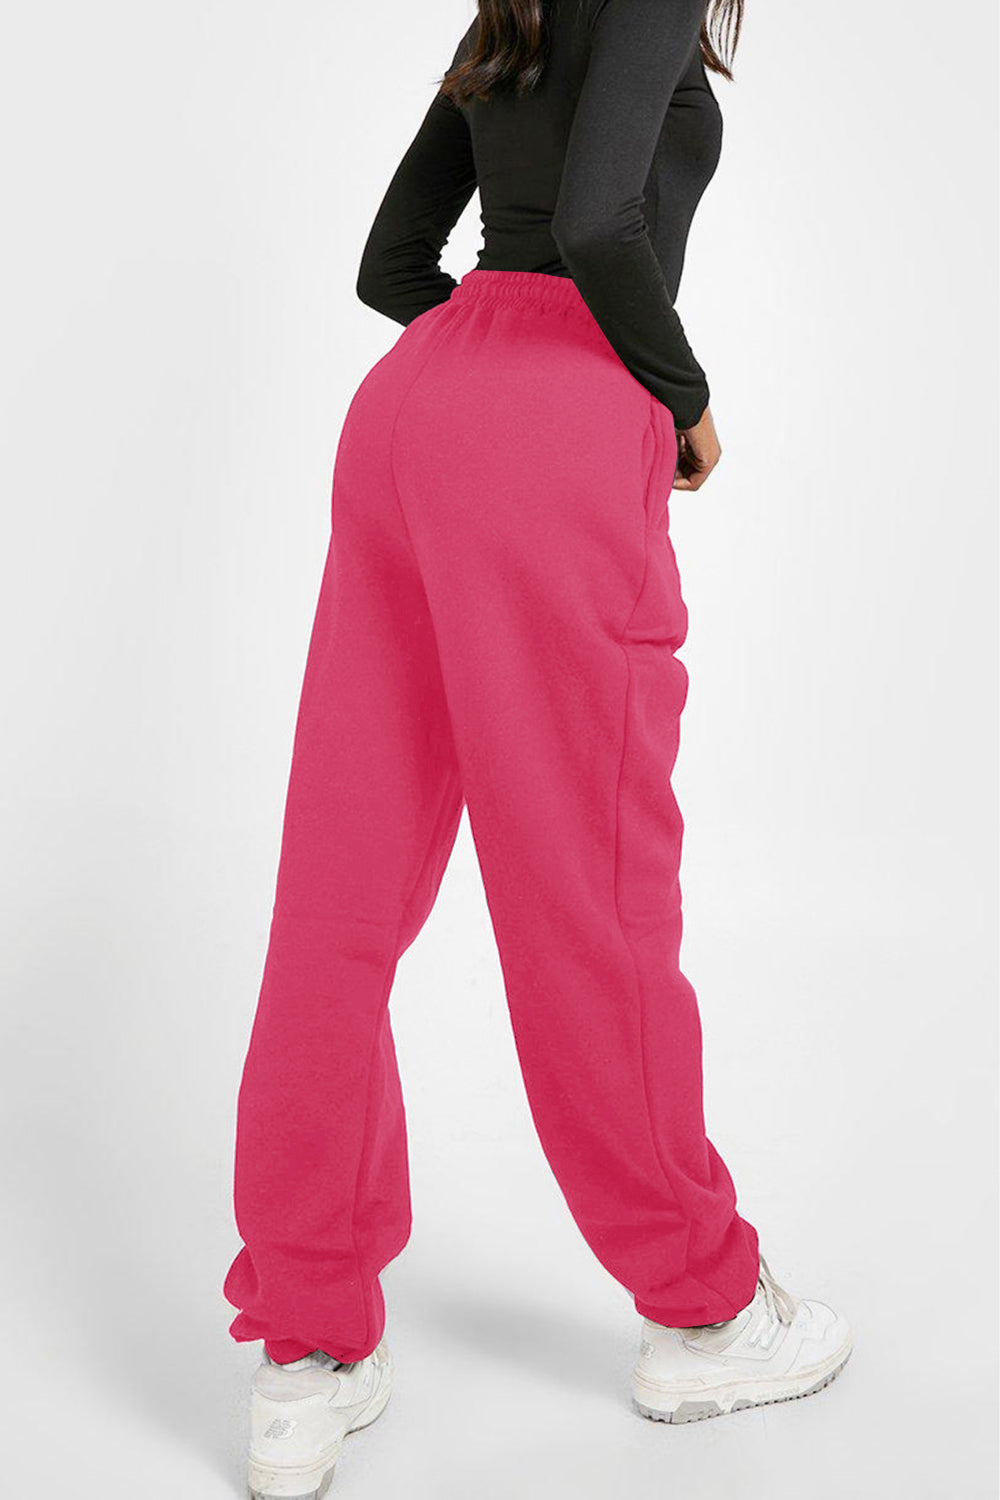 Simply Love Full Size Drawstring DAY YOU DESERVE Graphic Long Sweatpants